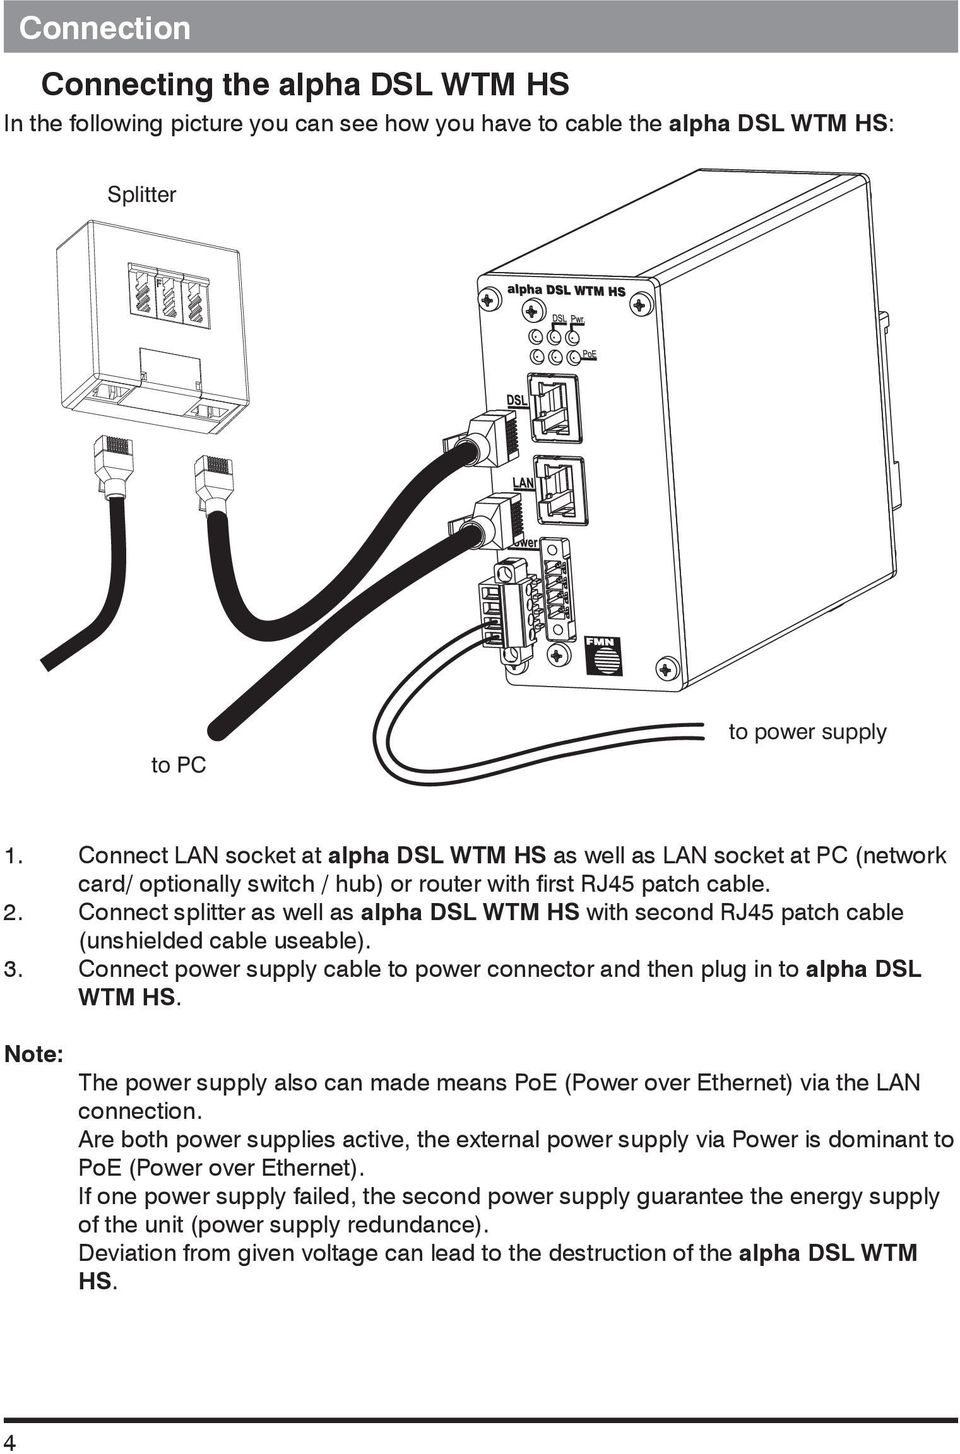 Connect splitter as well as alpha DSL WTM HS with second RJ45 patch cable (unshielded cable useable). 3. Connect power supply cable to power connector and then plug in to alpha DSL WTM HS.